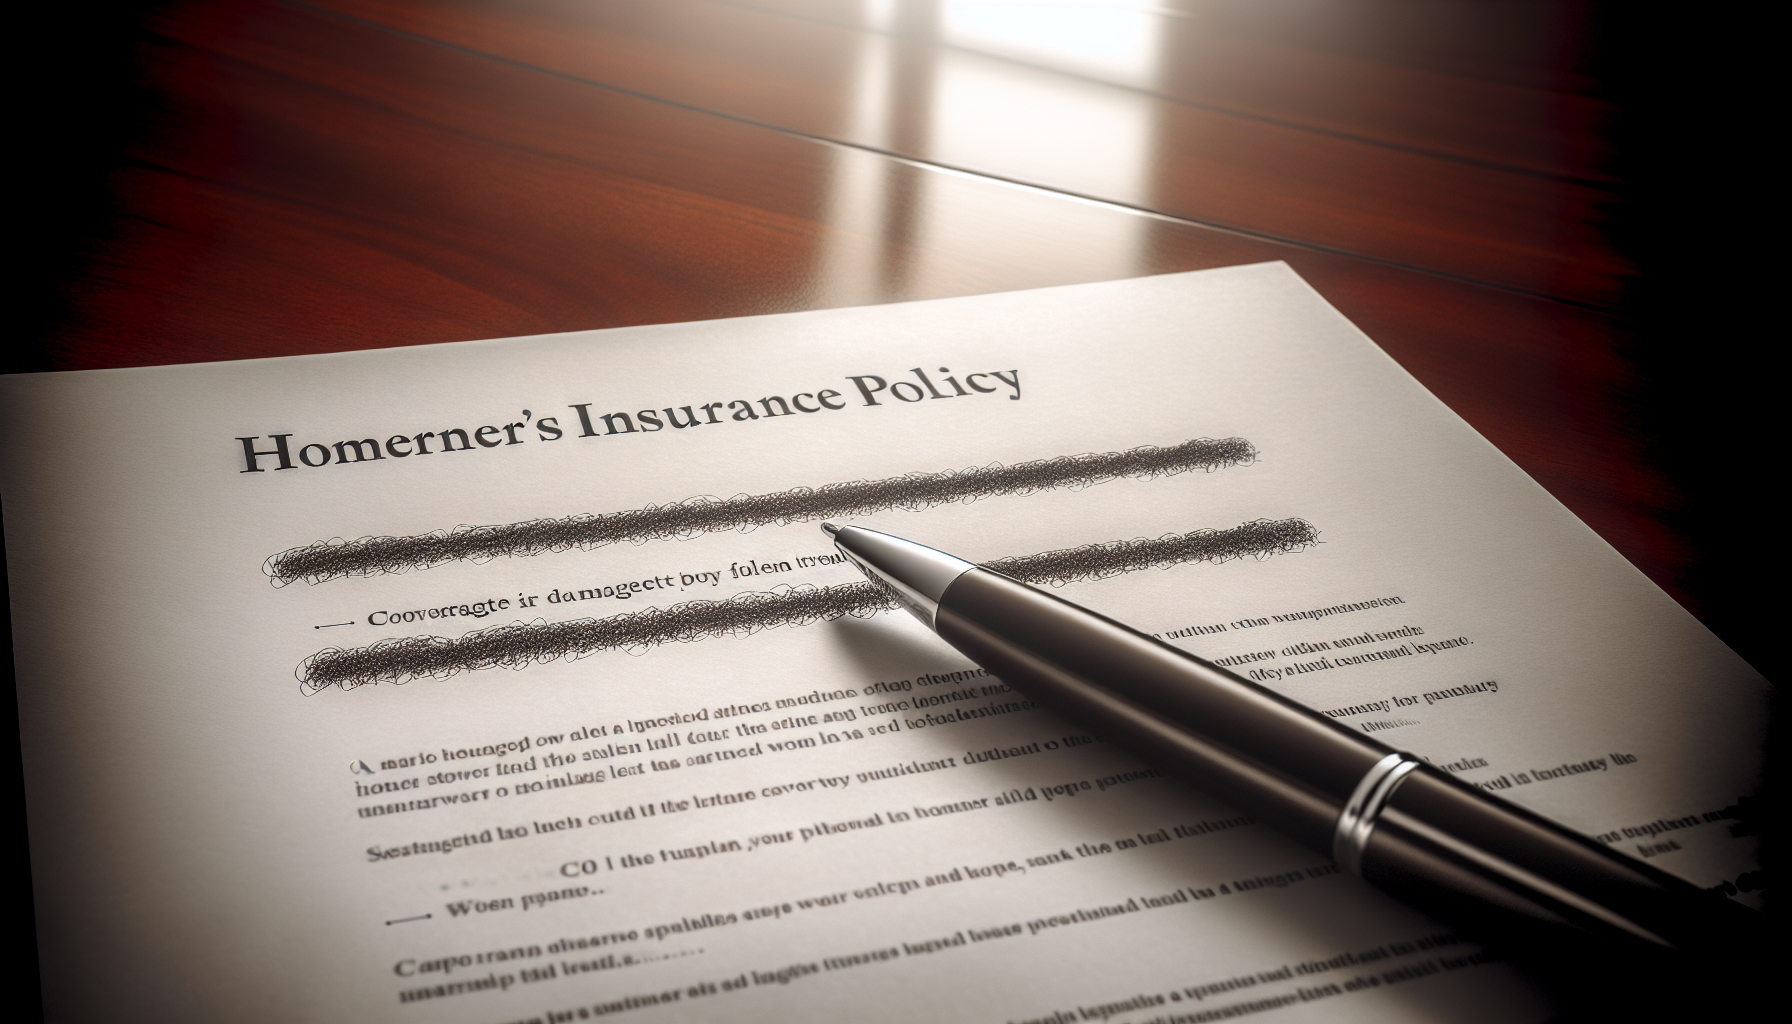 Homeowner's insurance policy document